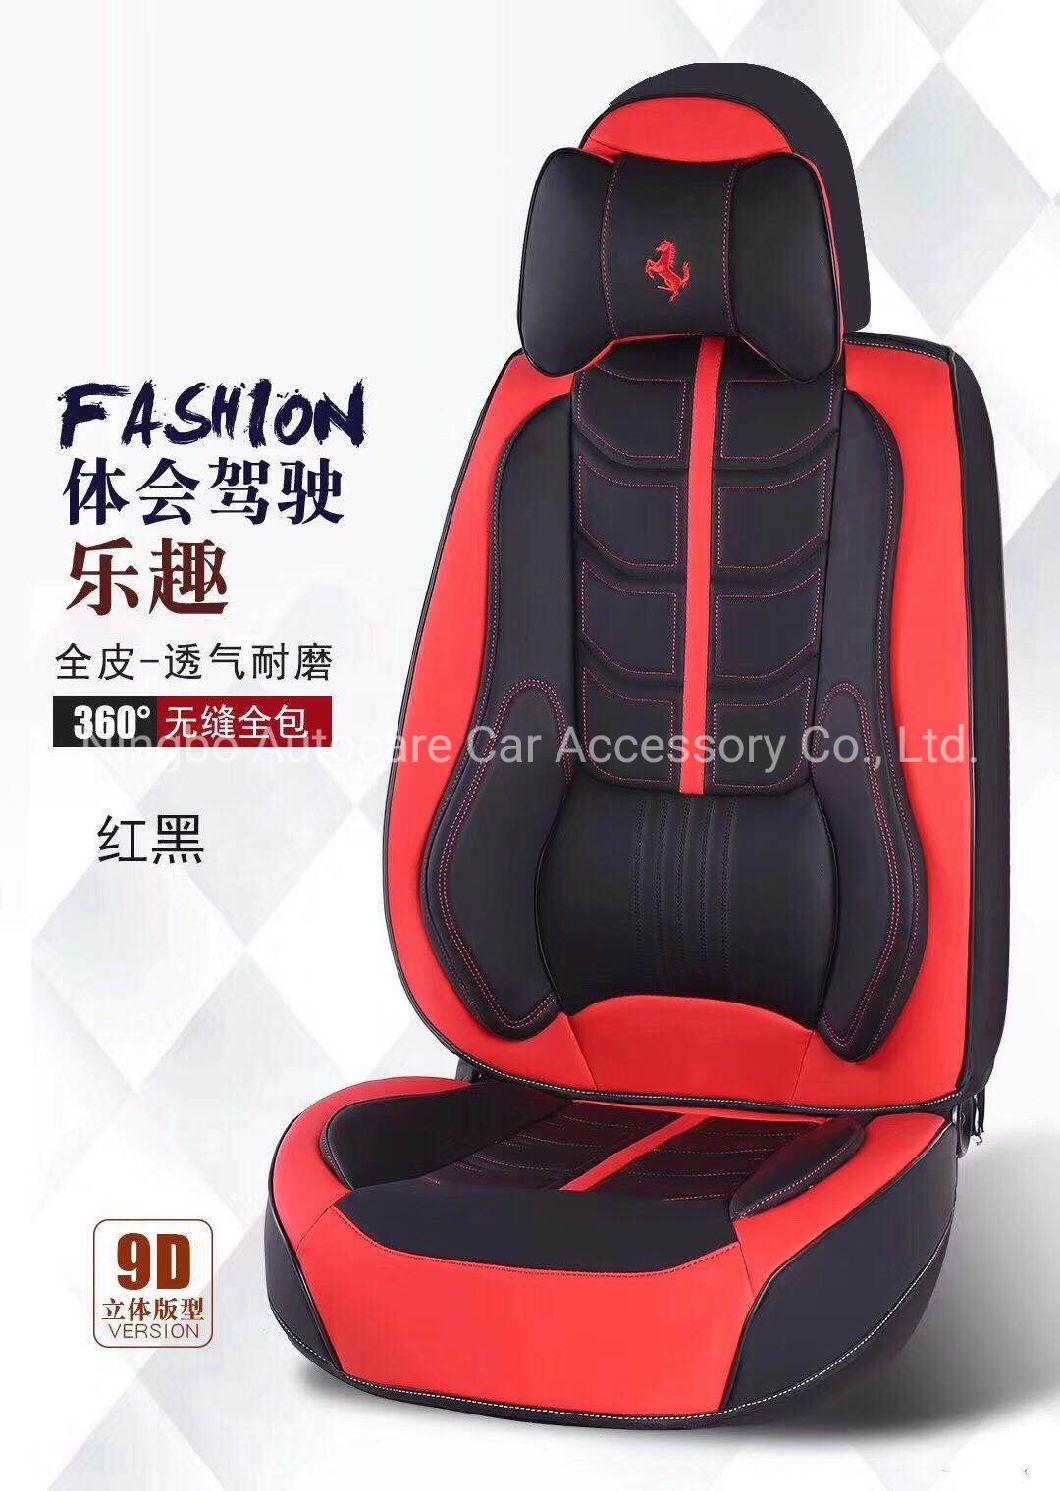 Car Accessories Car Decoration Car Seat Cushion Universal Fashion Pure Red Leather Auto 9d Car Seat Cover